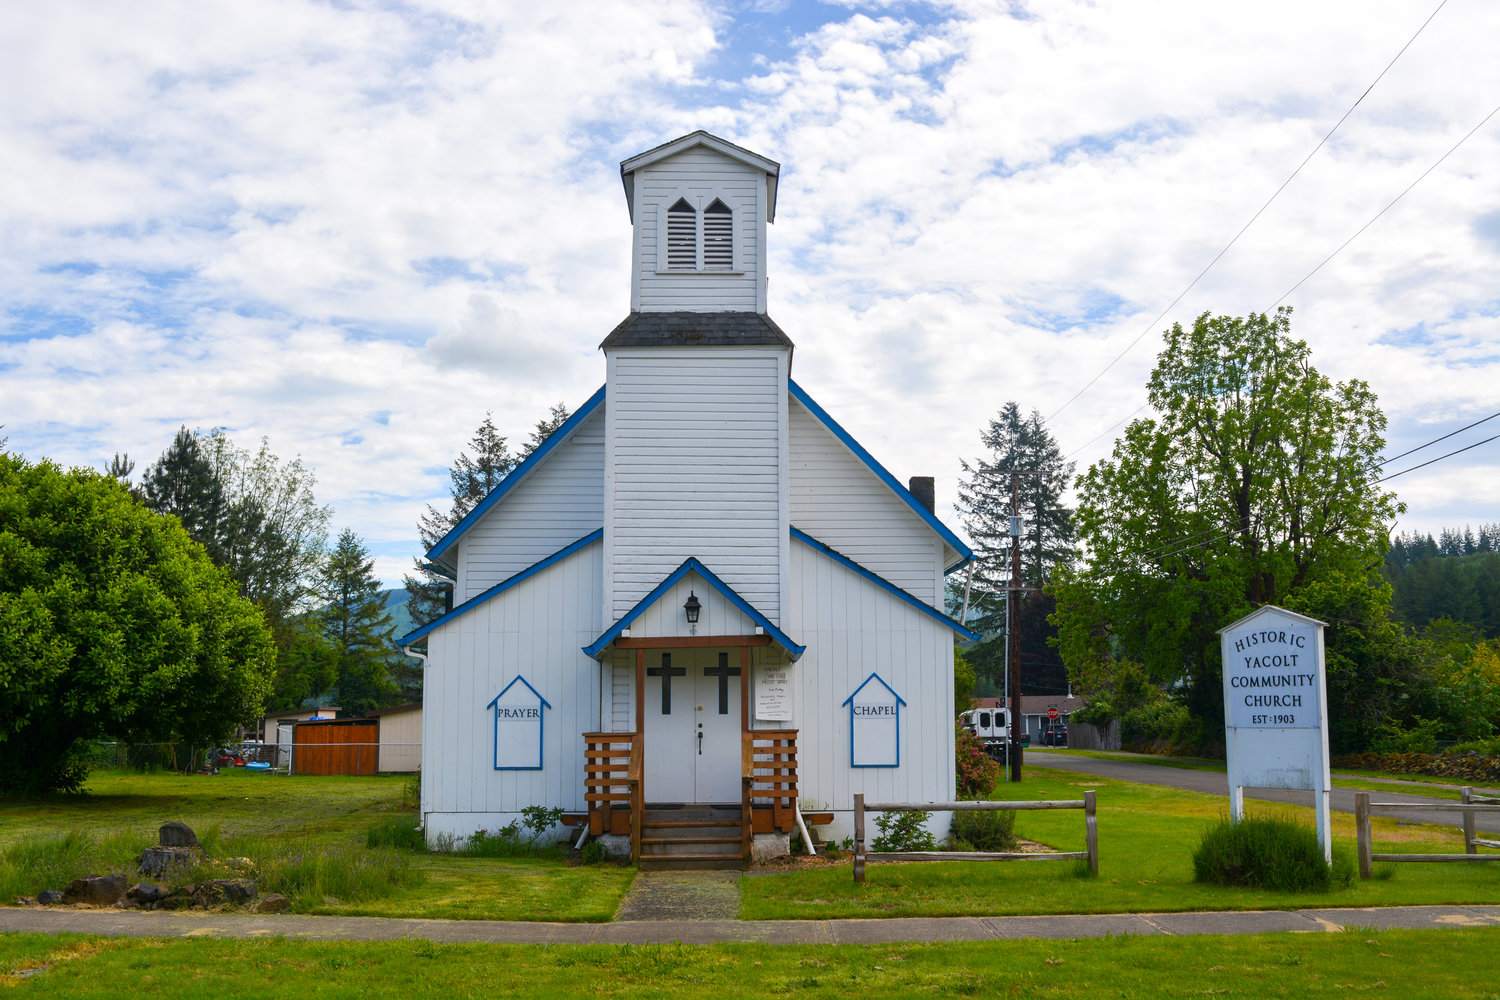 The exterior of the Historic Yacolt Community Church is seen on June 15.